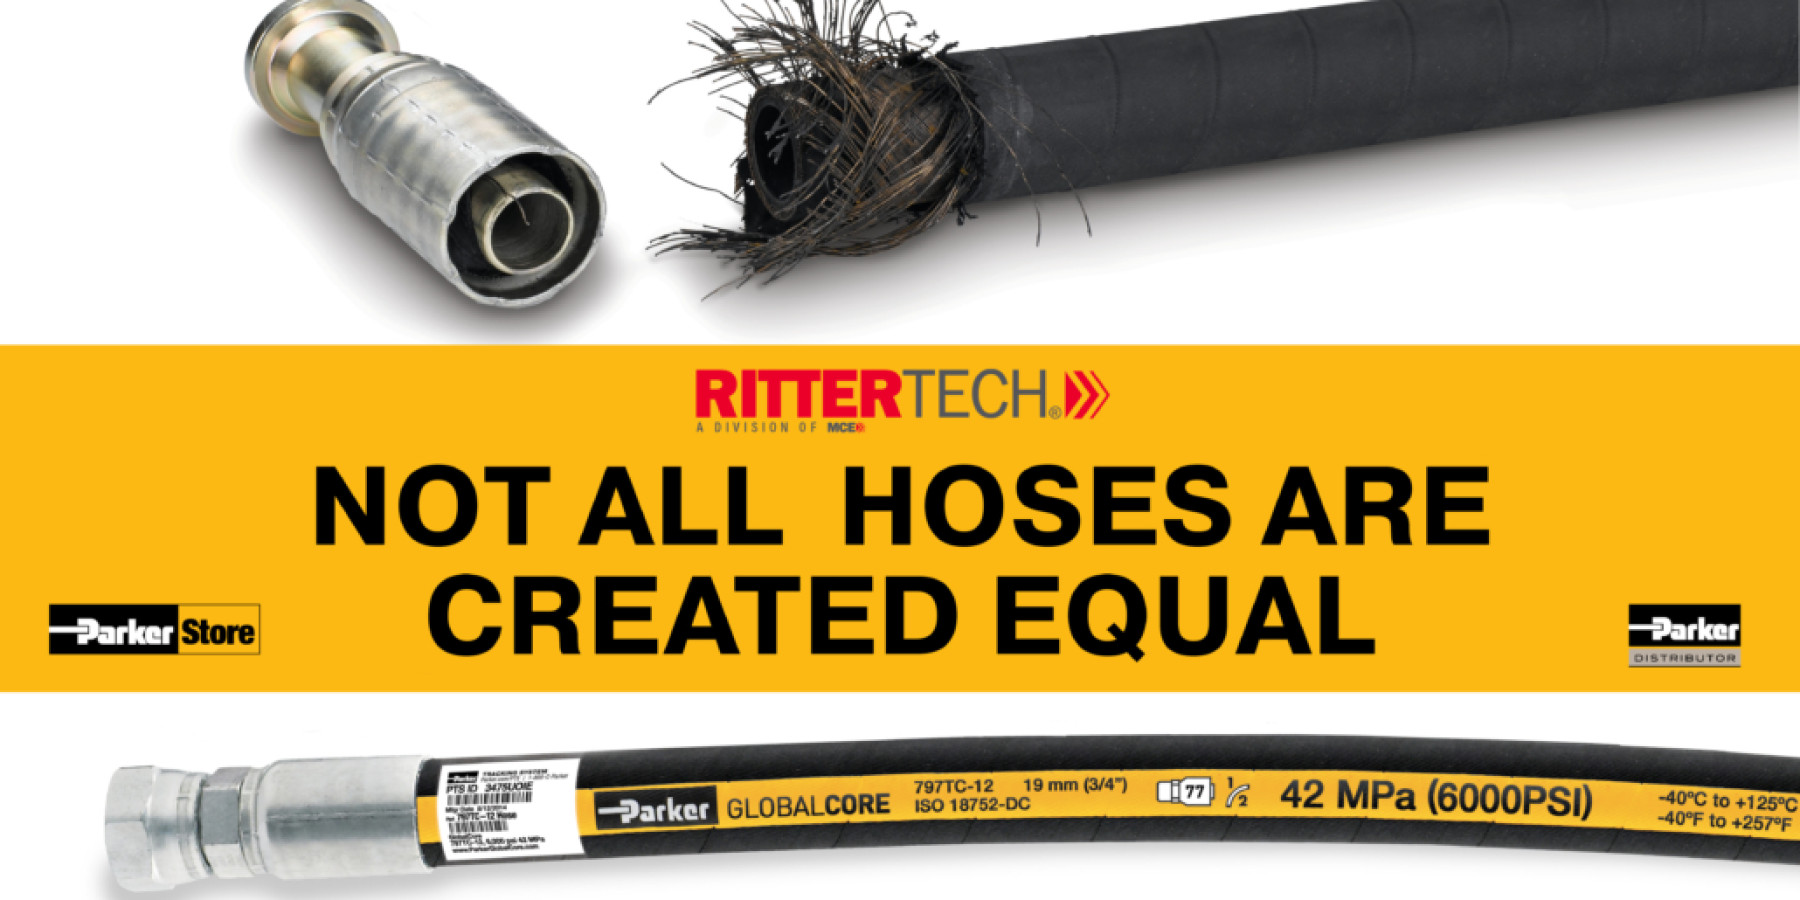 not all hoses are created equal ad